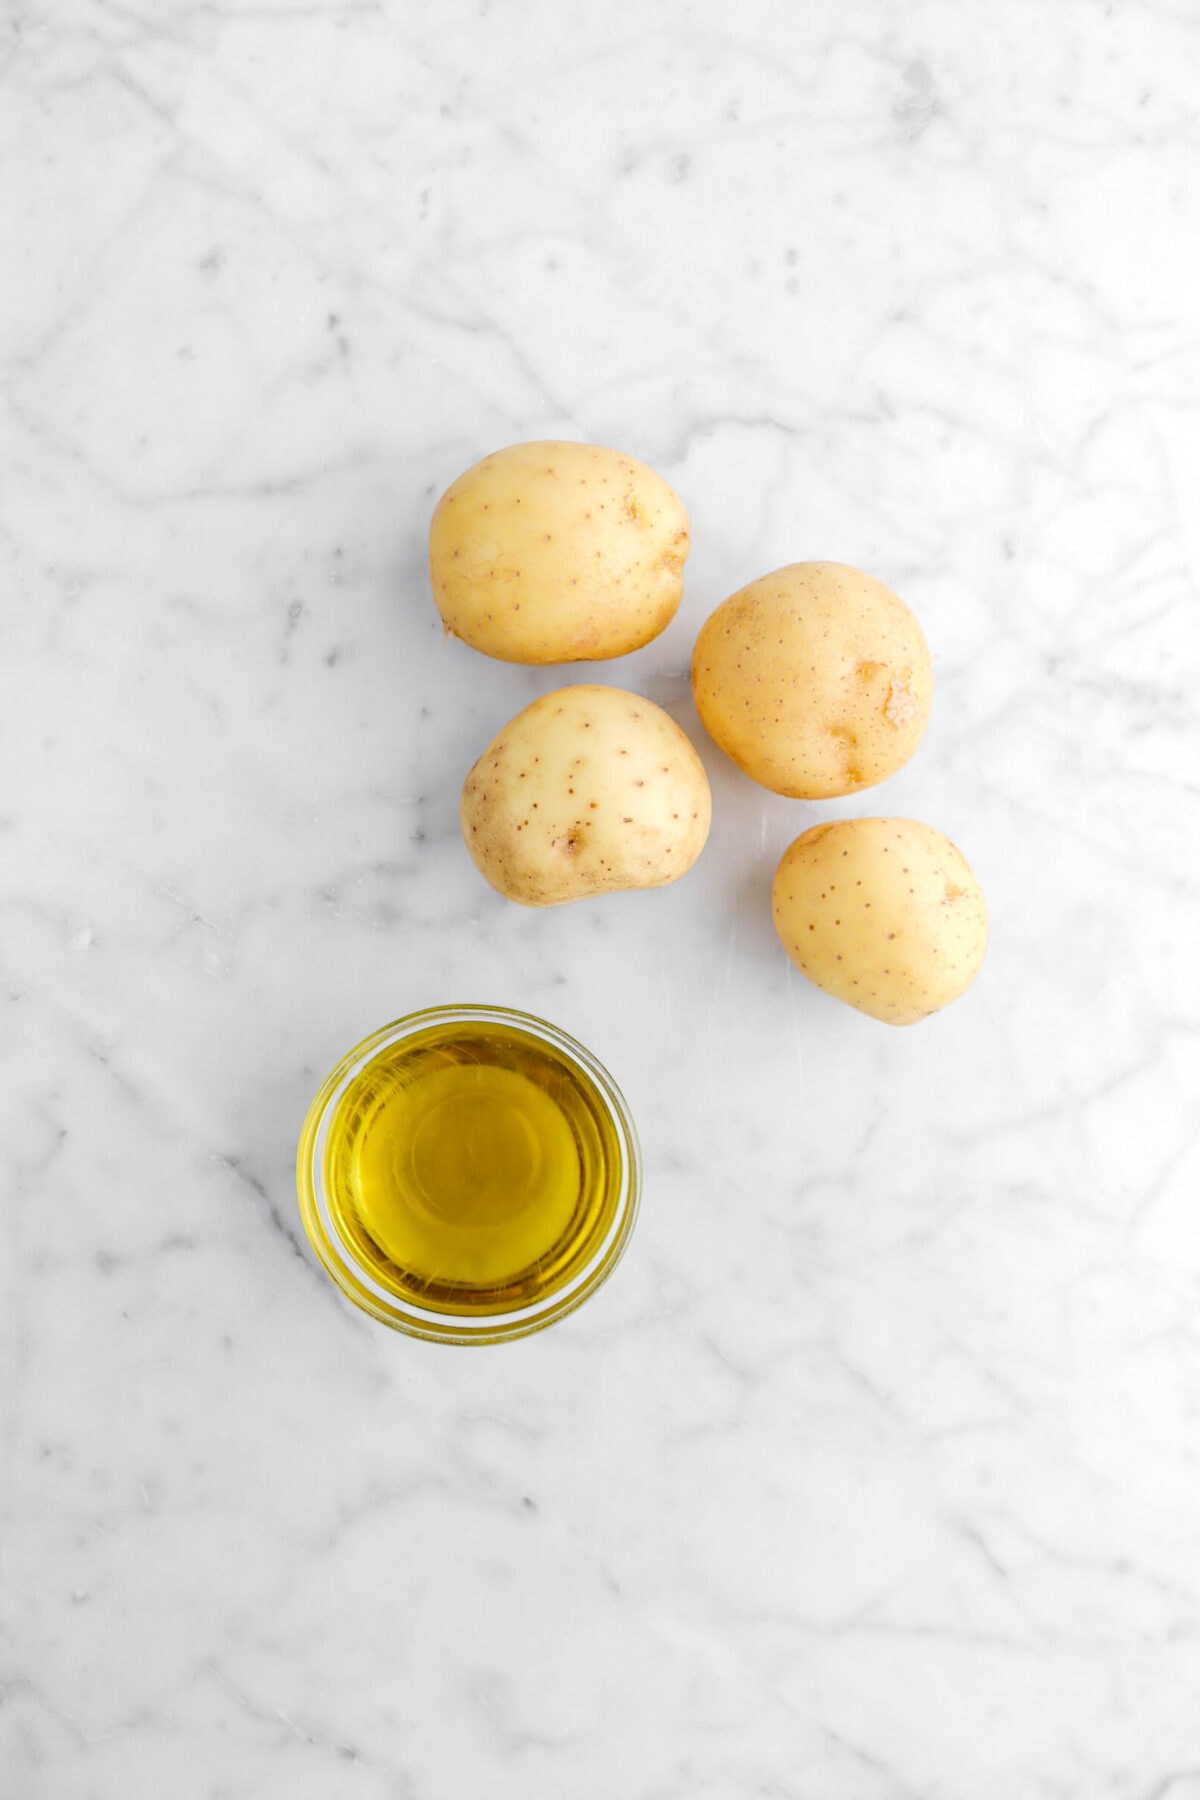 potatoes and olive oil on marble surface